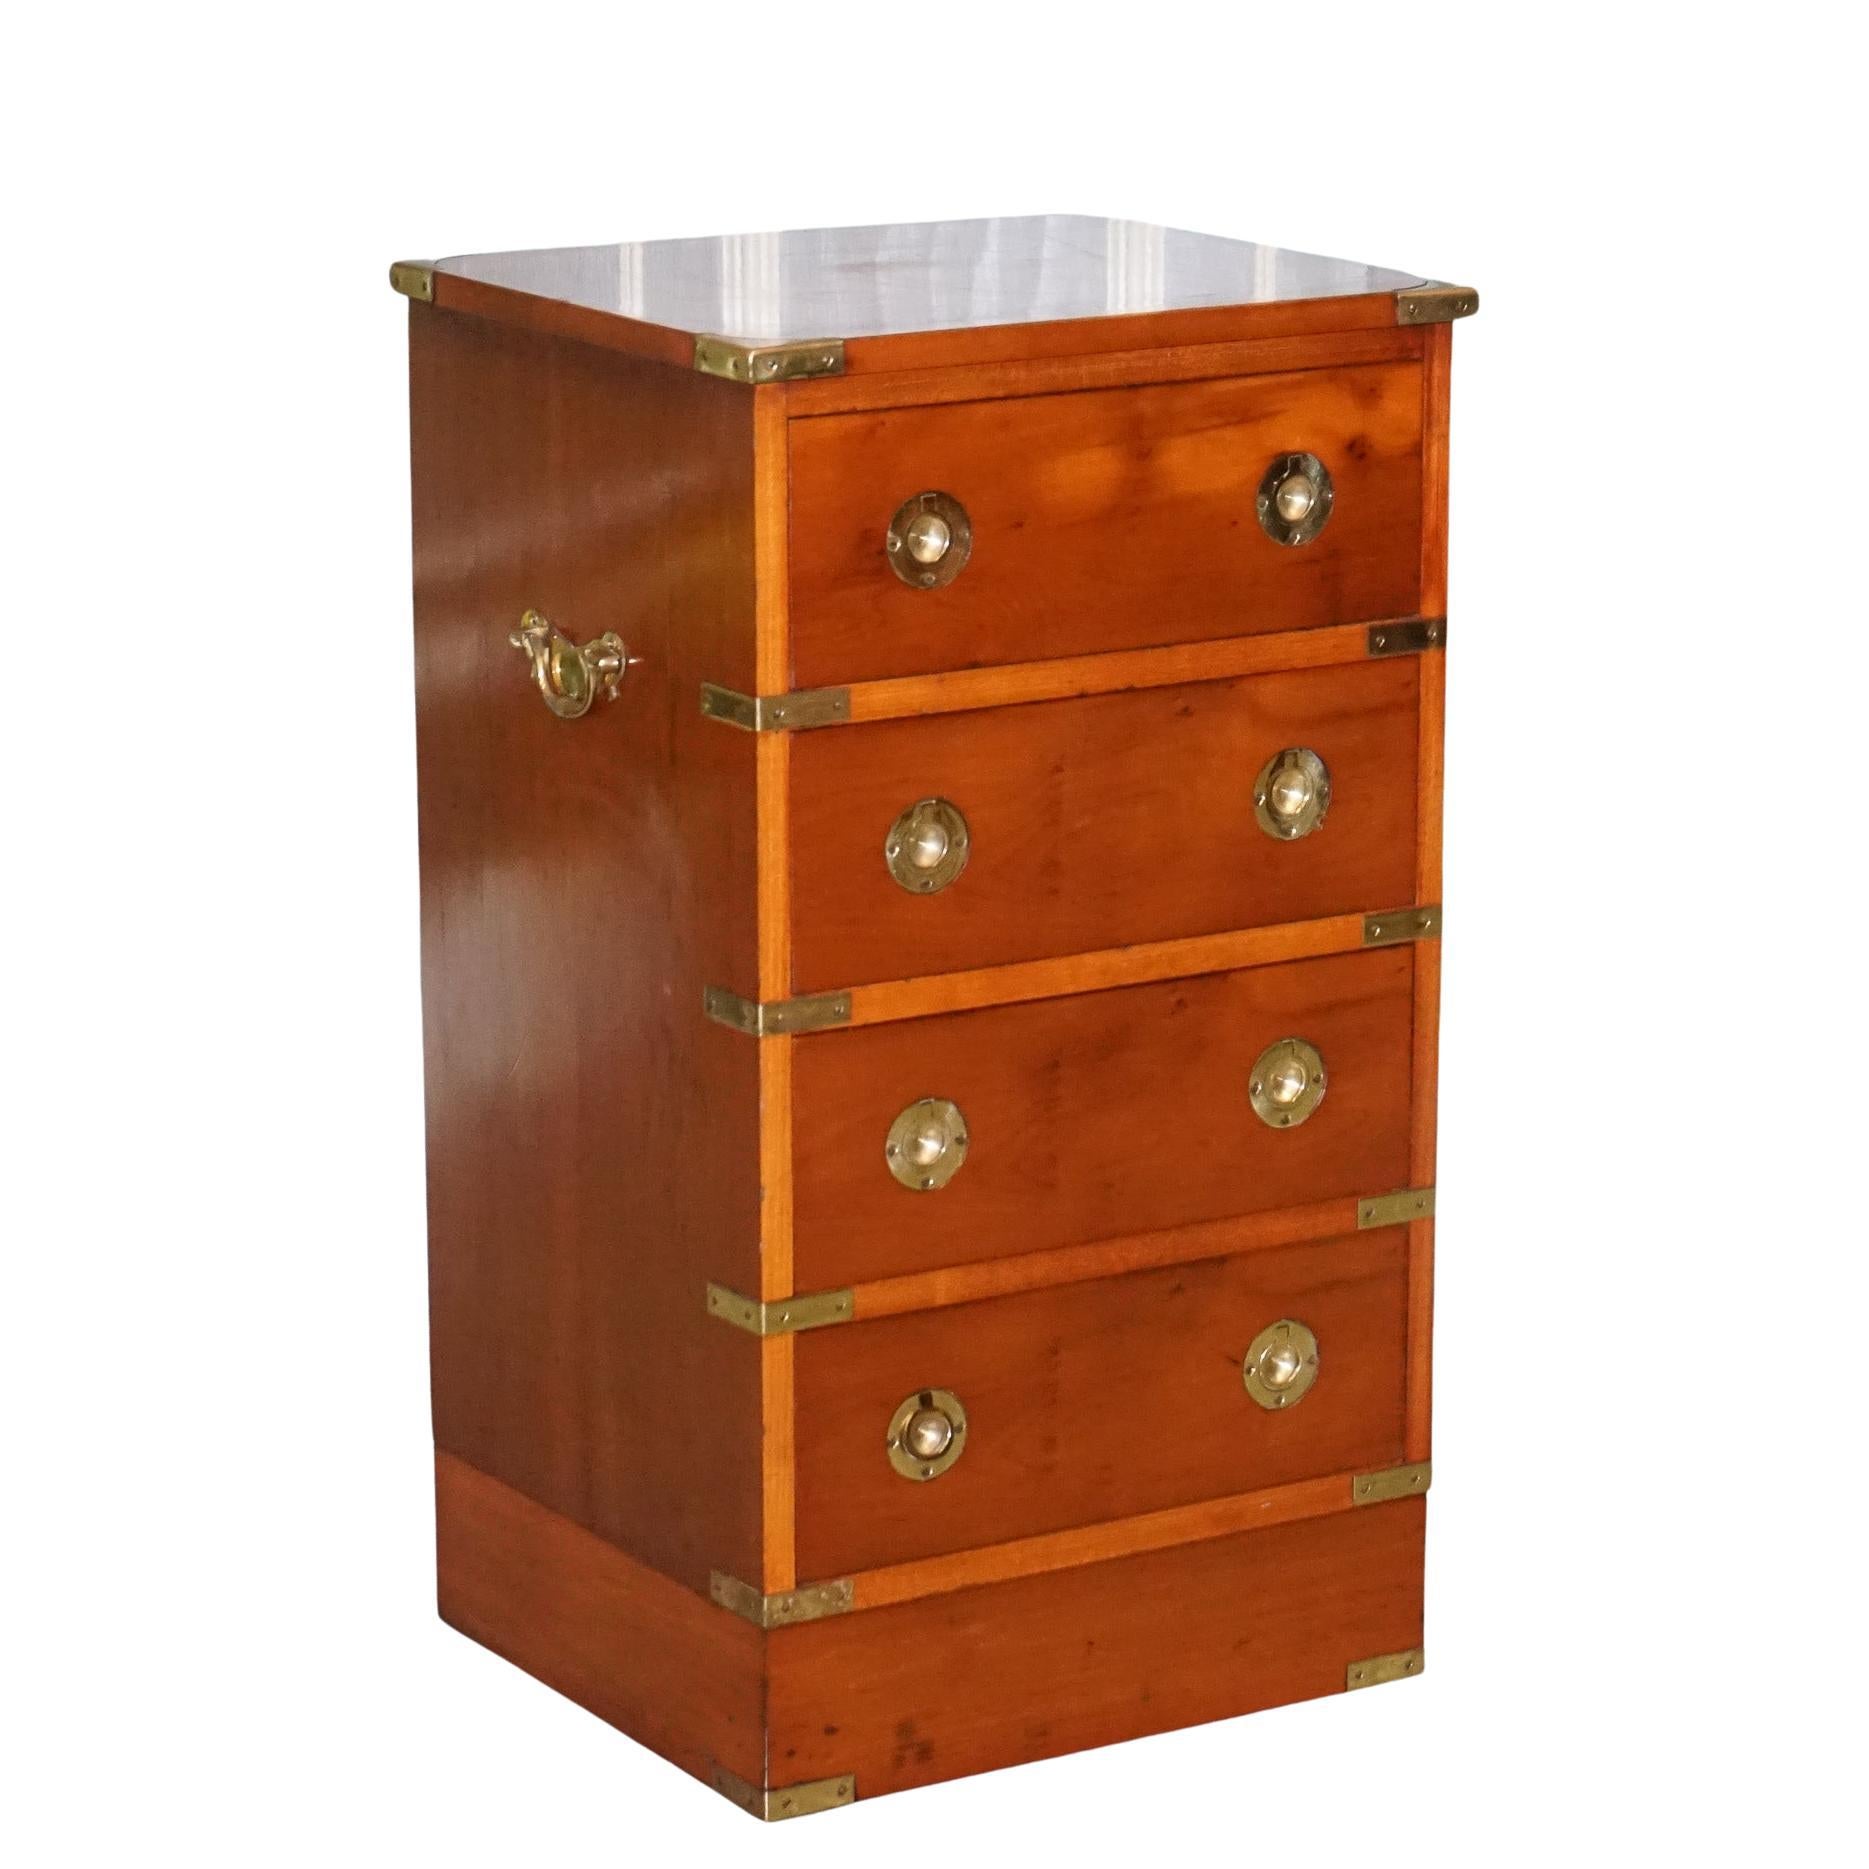 Vintage Yew Wood Military Campaign Chest of Drawers with 4 Drawers Brass Fitting